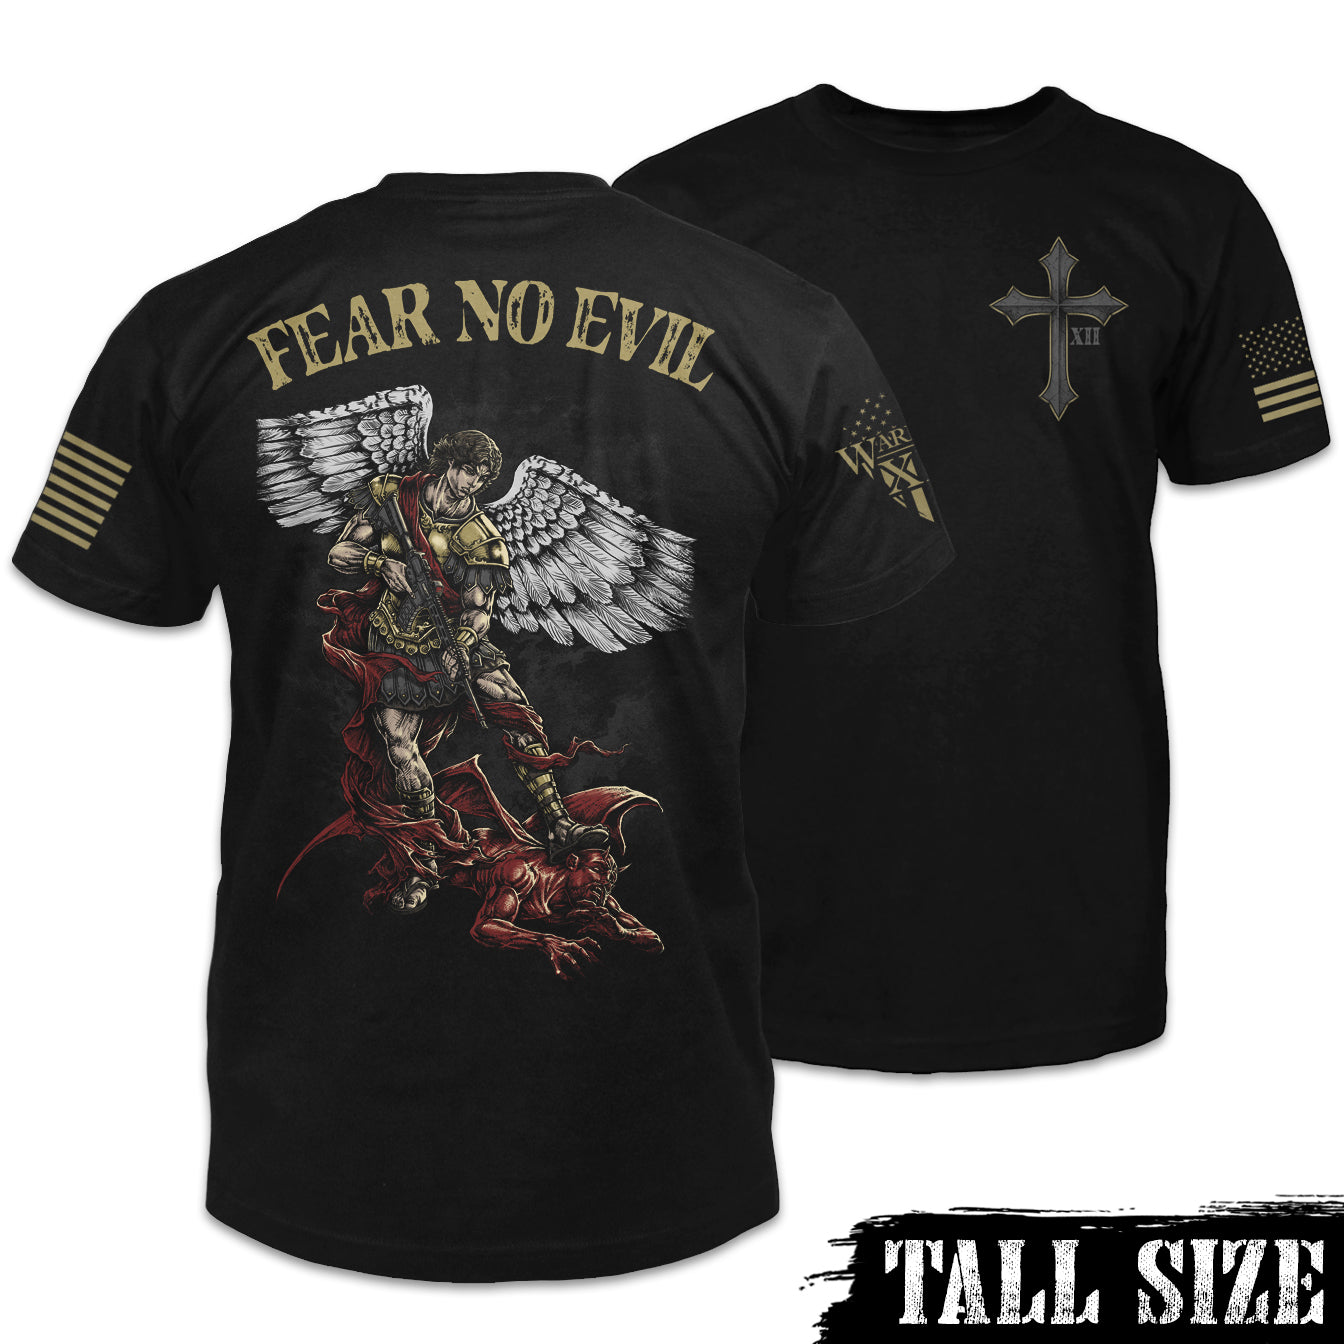 Front & back black tall size shirt with the words "fear no evil" with a Saint Michael the Archangel holding a gun with his foot on Satan printed on the shirt.